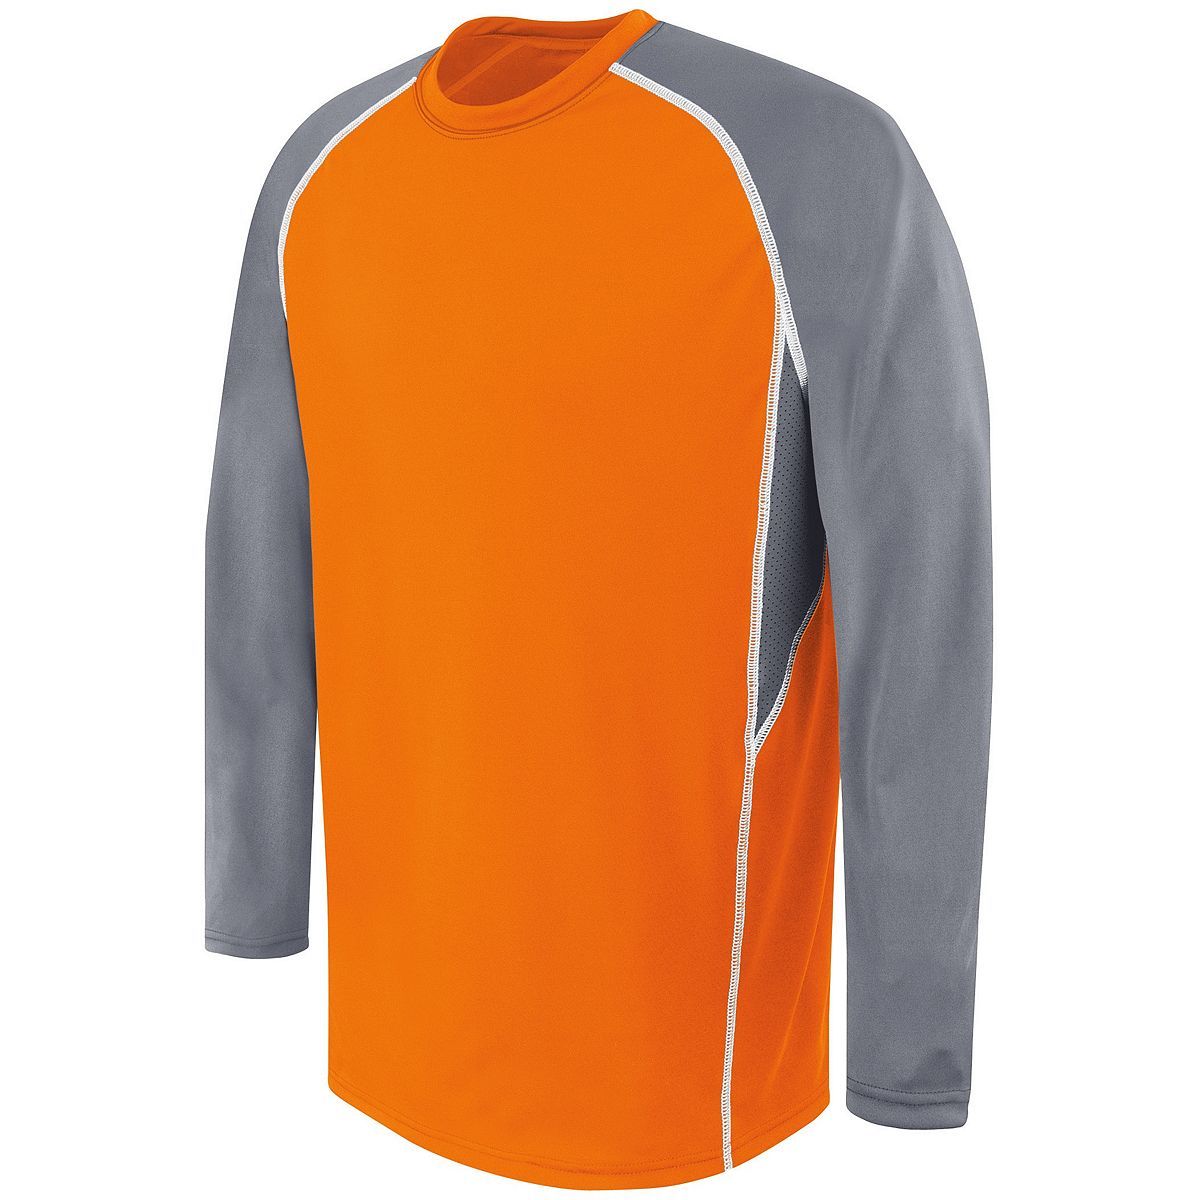 High 5 Adult Long Sleeve Evolution Top in Orange/Graphite/White  -Part of the Adult, High5-Products, Shirts product lines at KanaleyCreations.com